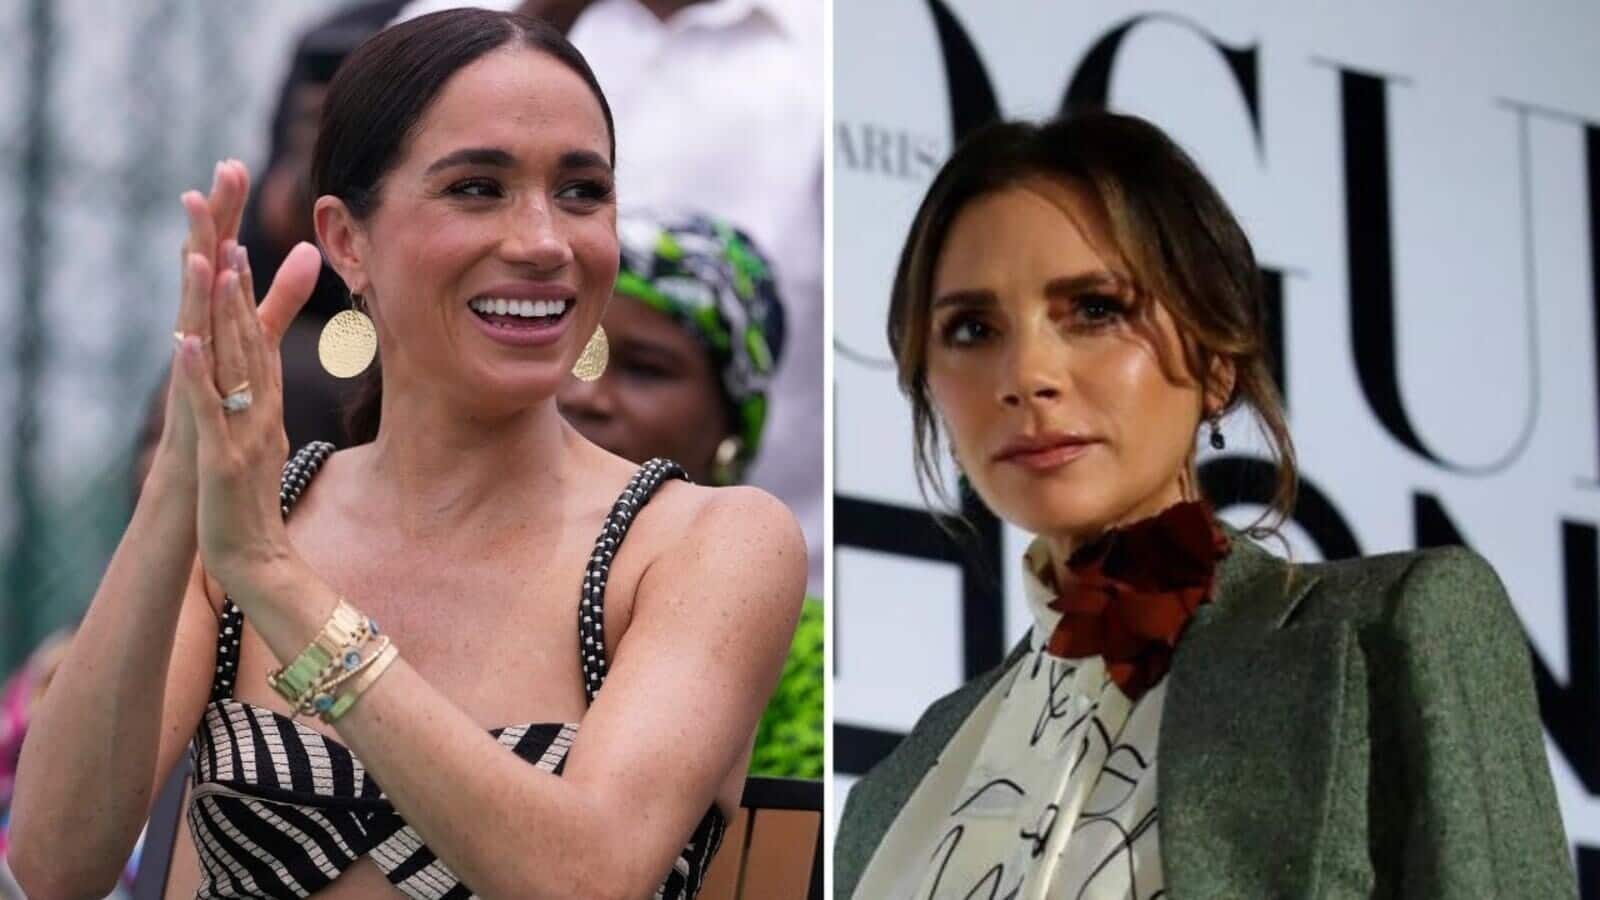 Tom Bower details Meghan Markle-Victoria Beckham fallout in new book